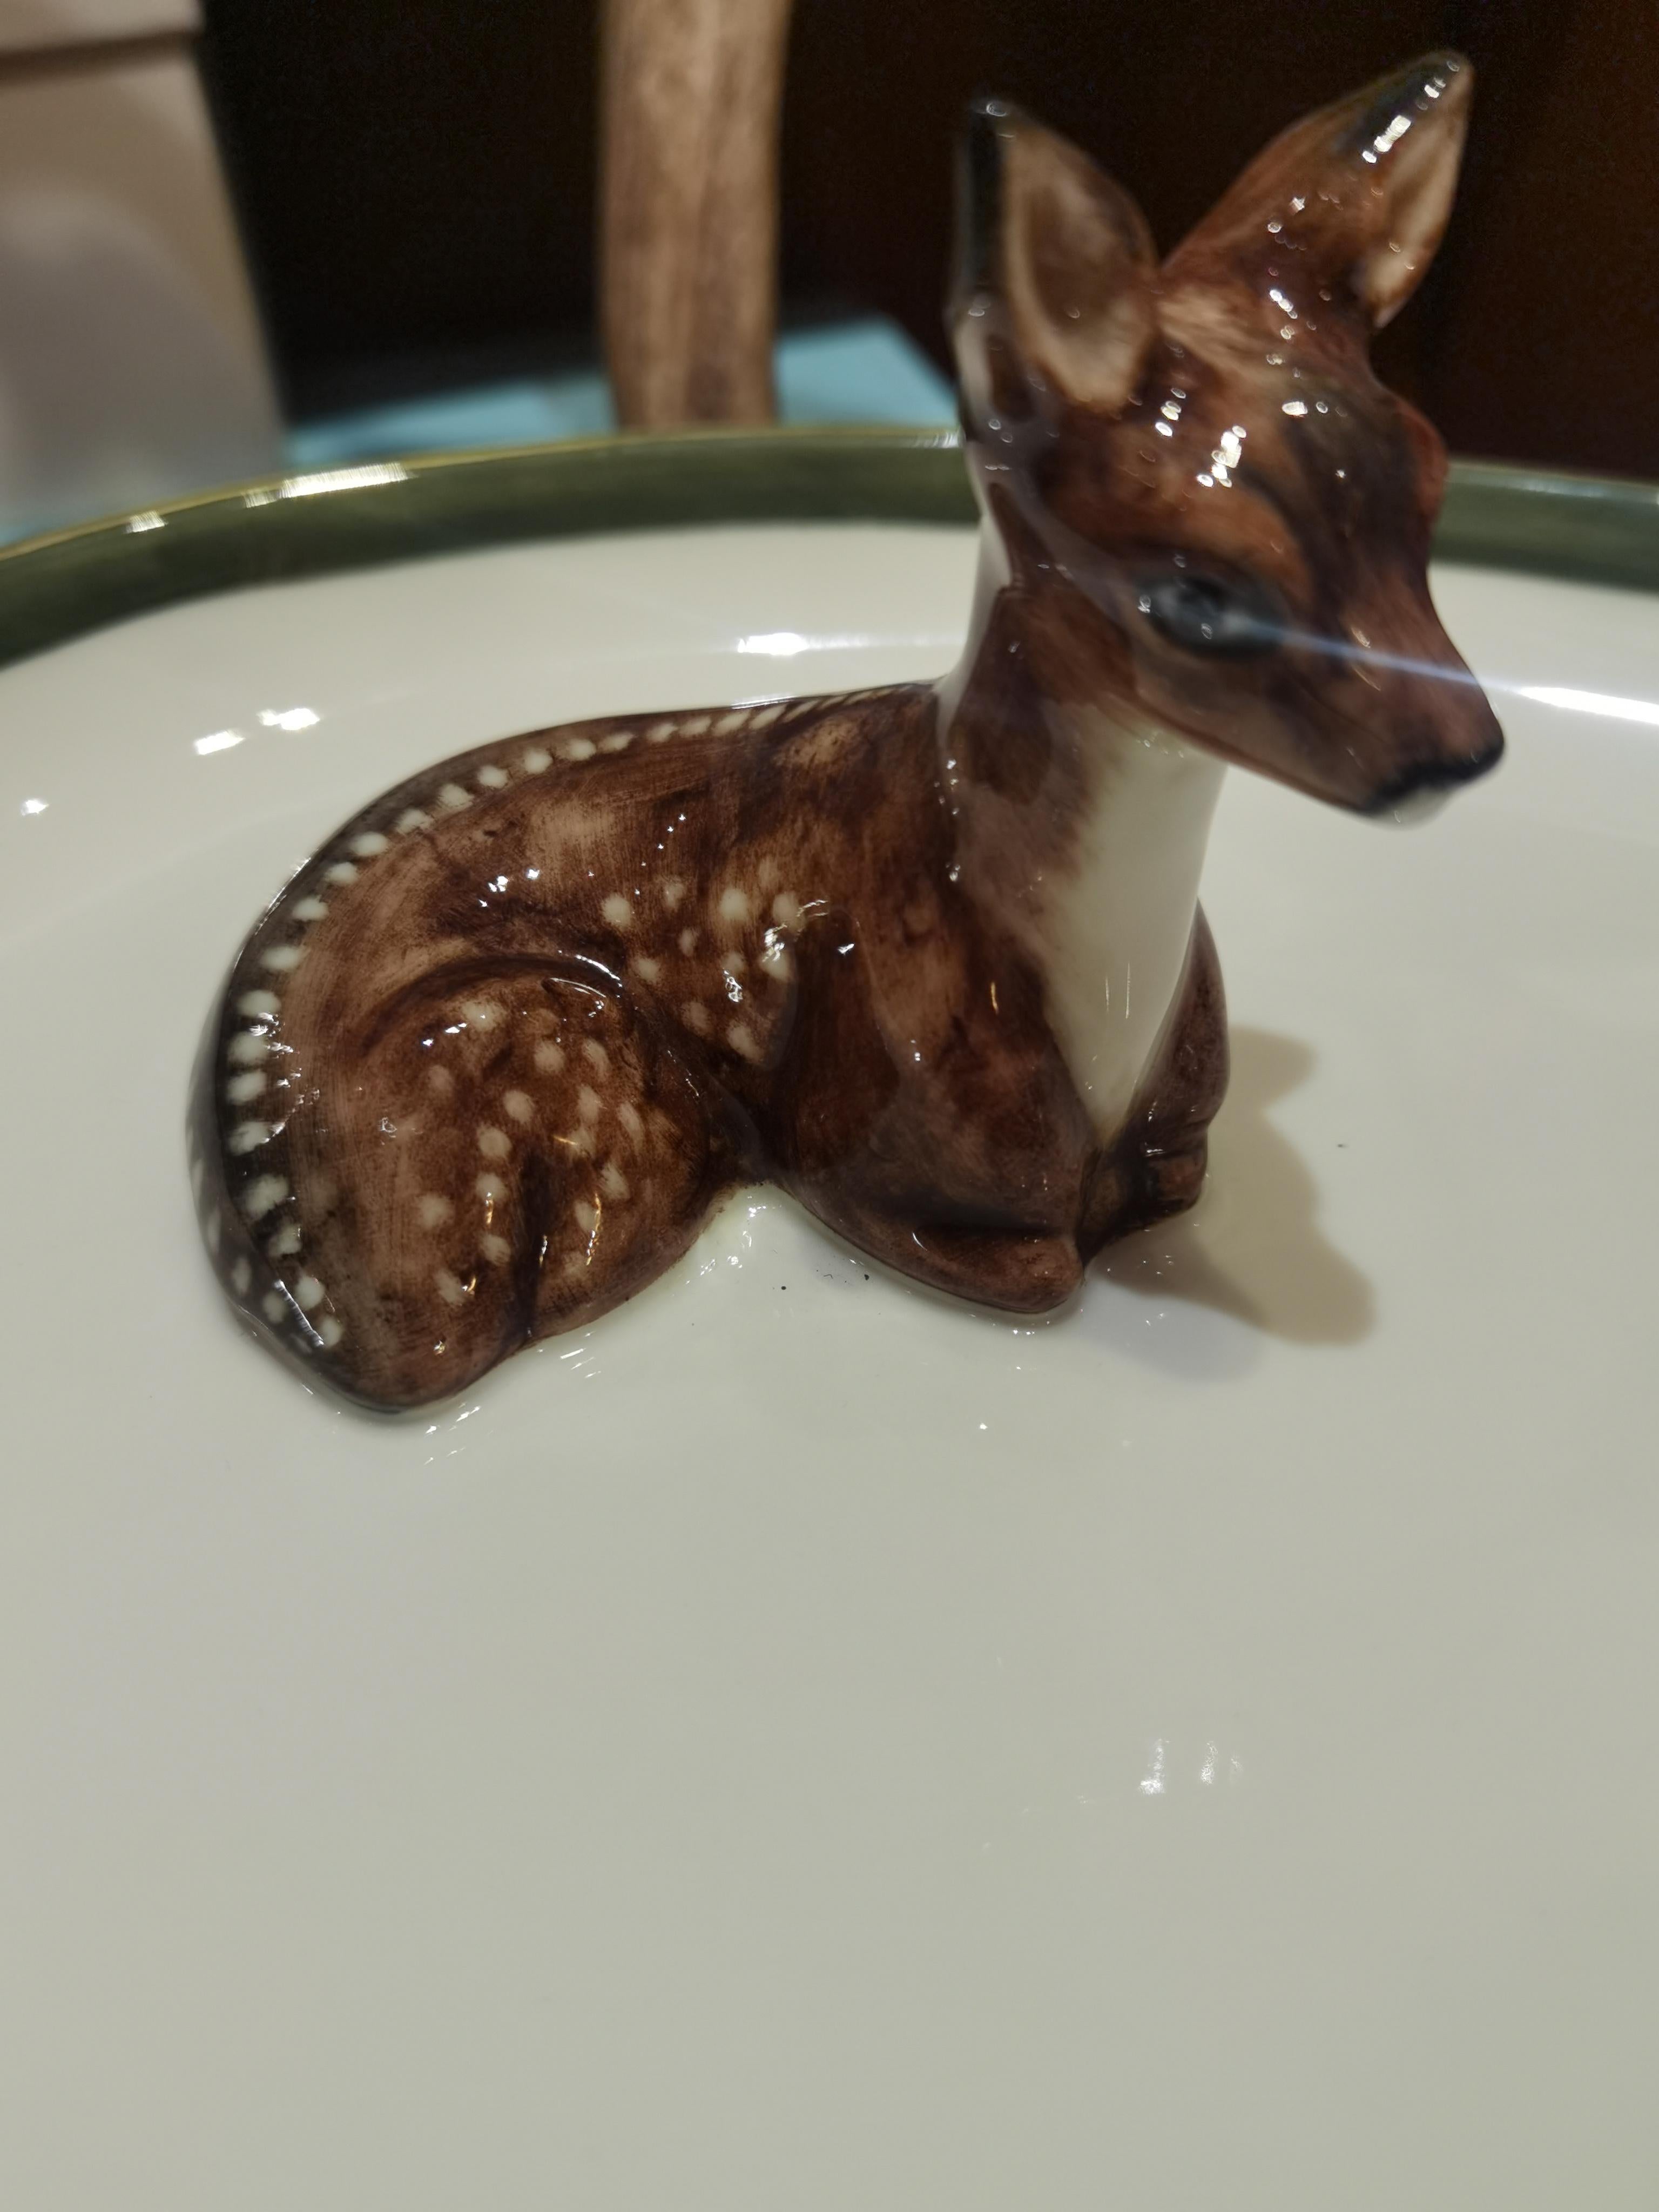 Completely handmade and hands-free painted large oval porcelain plate in Black Forest style. A natural molded porcelain bambi figure is sitting left hand and three pines are fixed on the porcelain plate. One pine is gilded in 24 carat gold. The